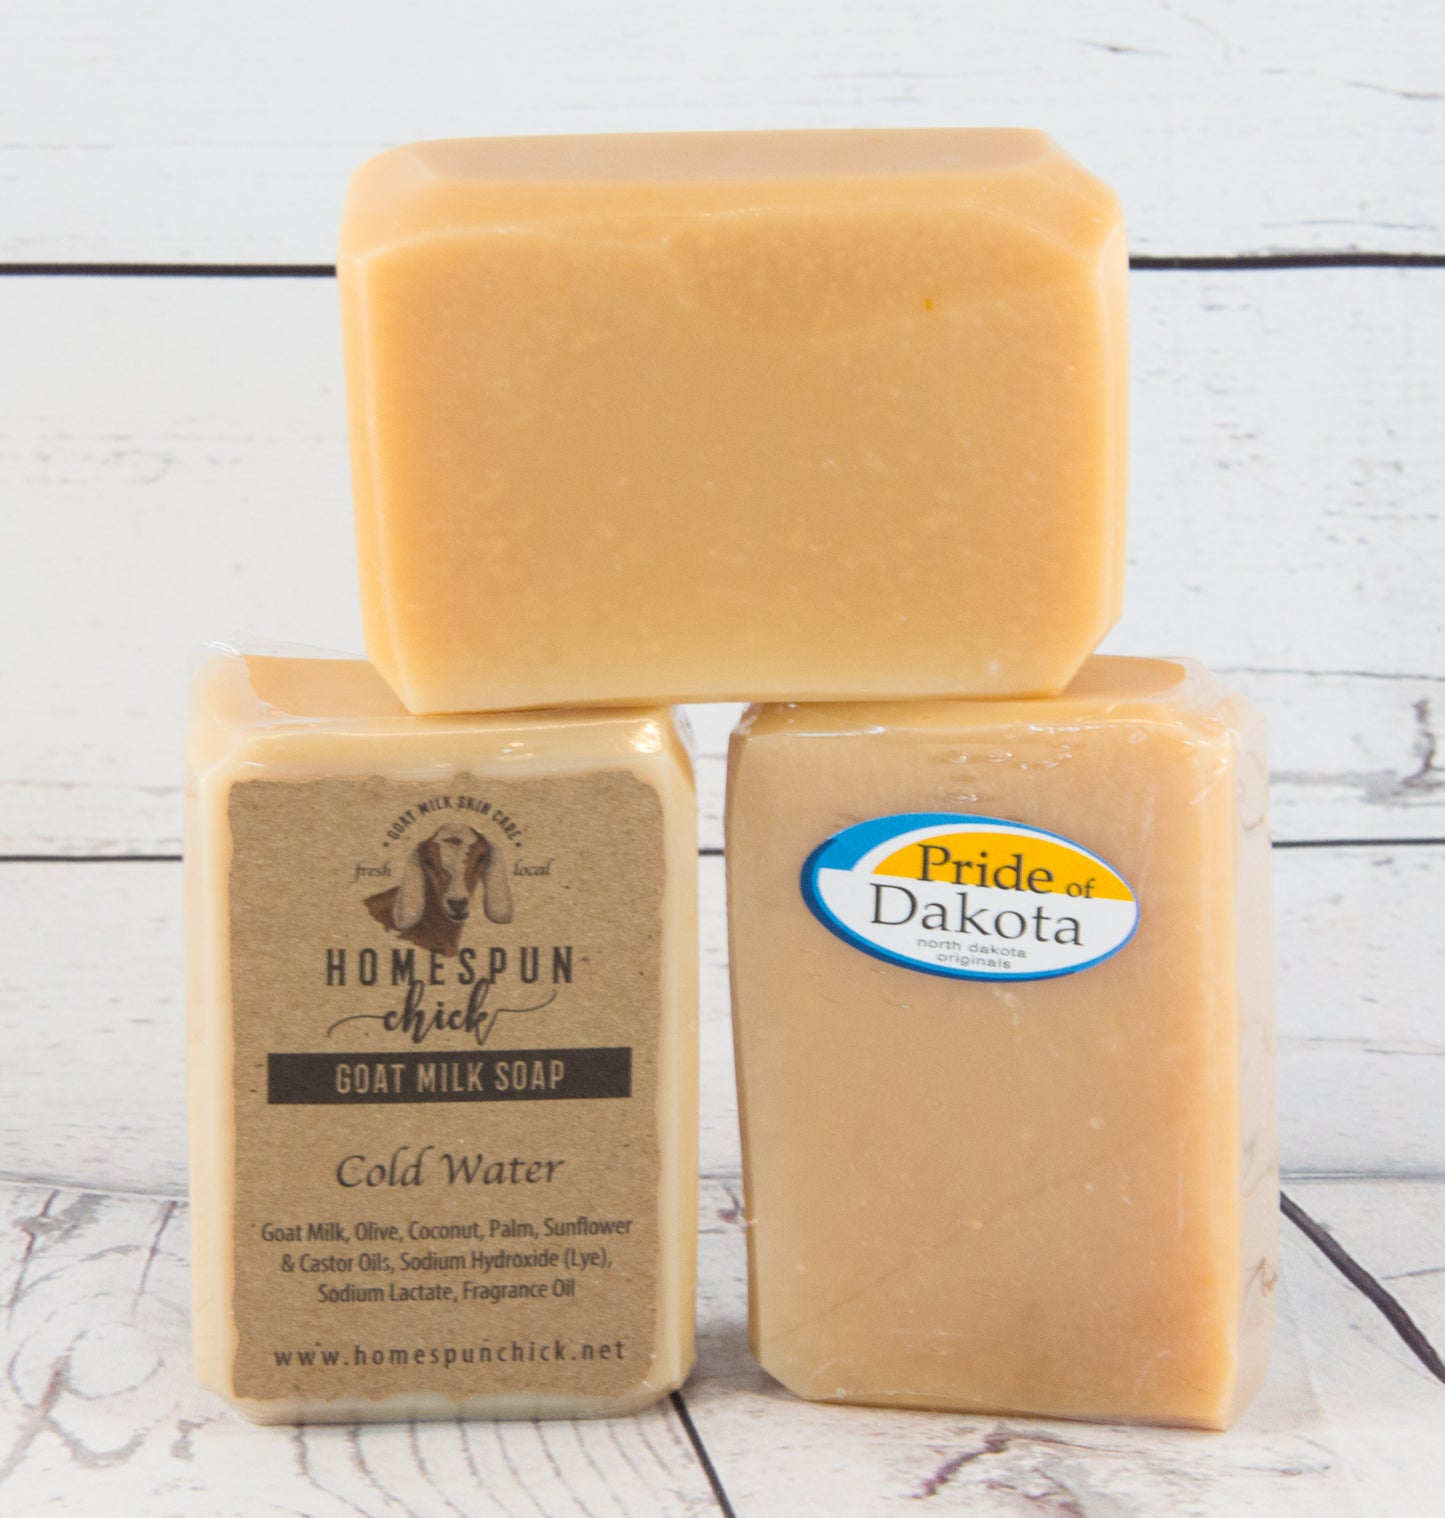 Cold Water Goat Milk Soap